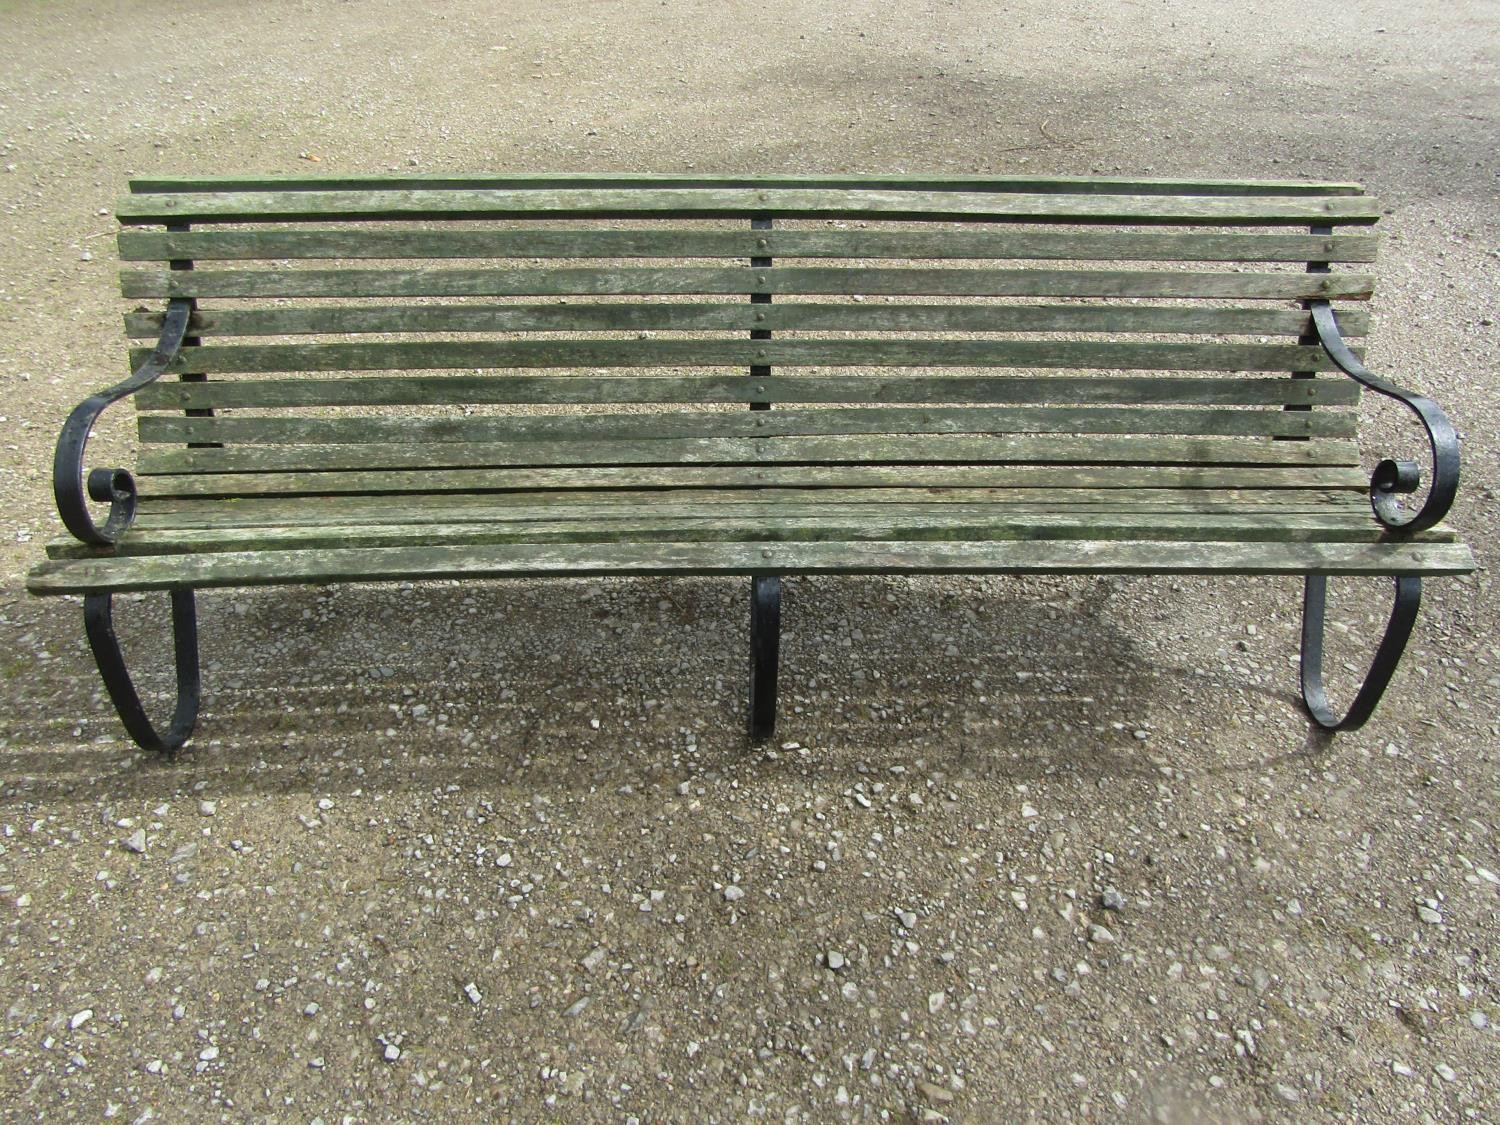 A vintage heavy gauge park/estate garden bench with weathered green painted teak slatted seat raised